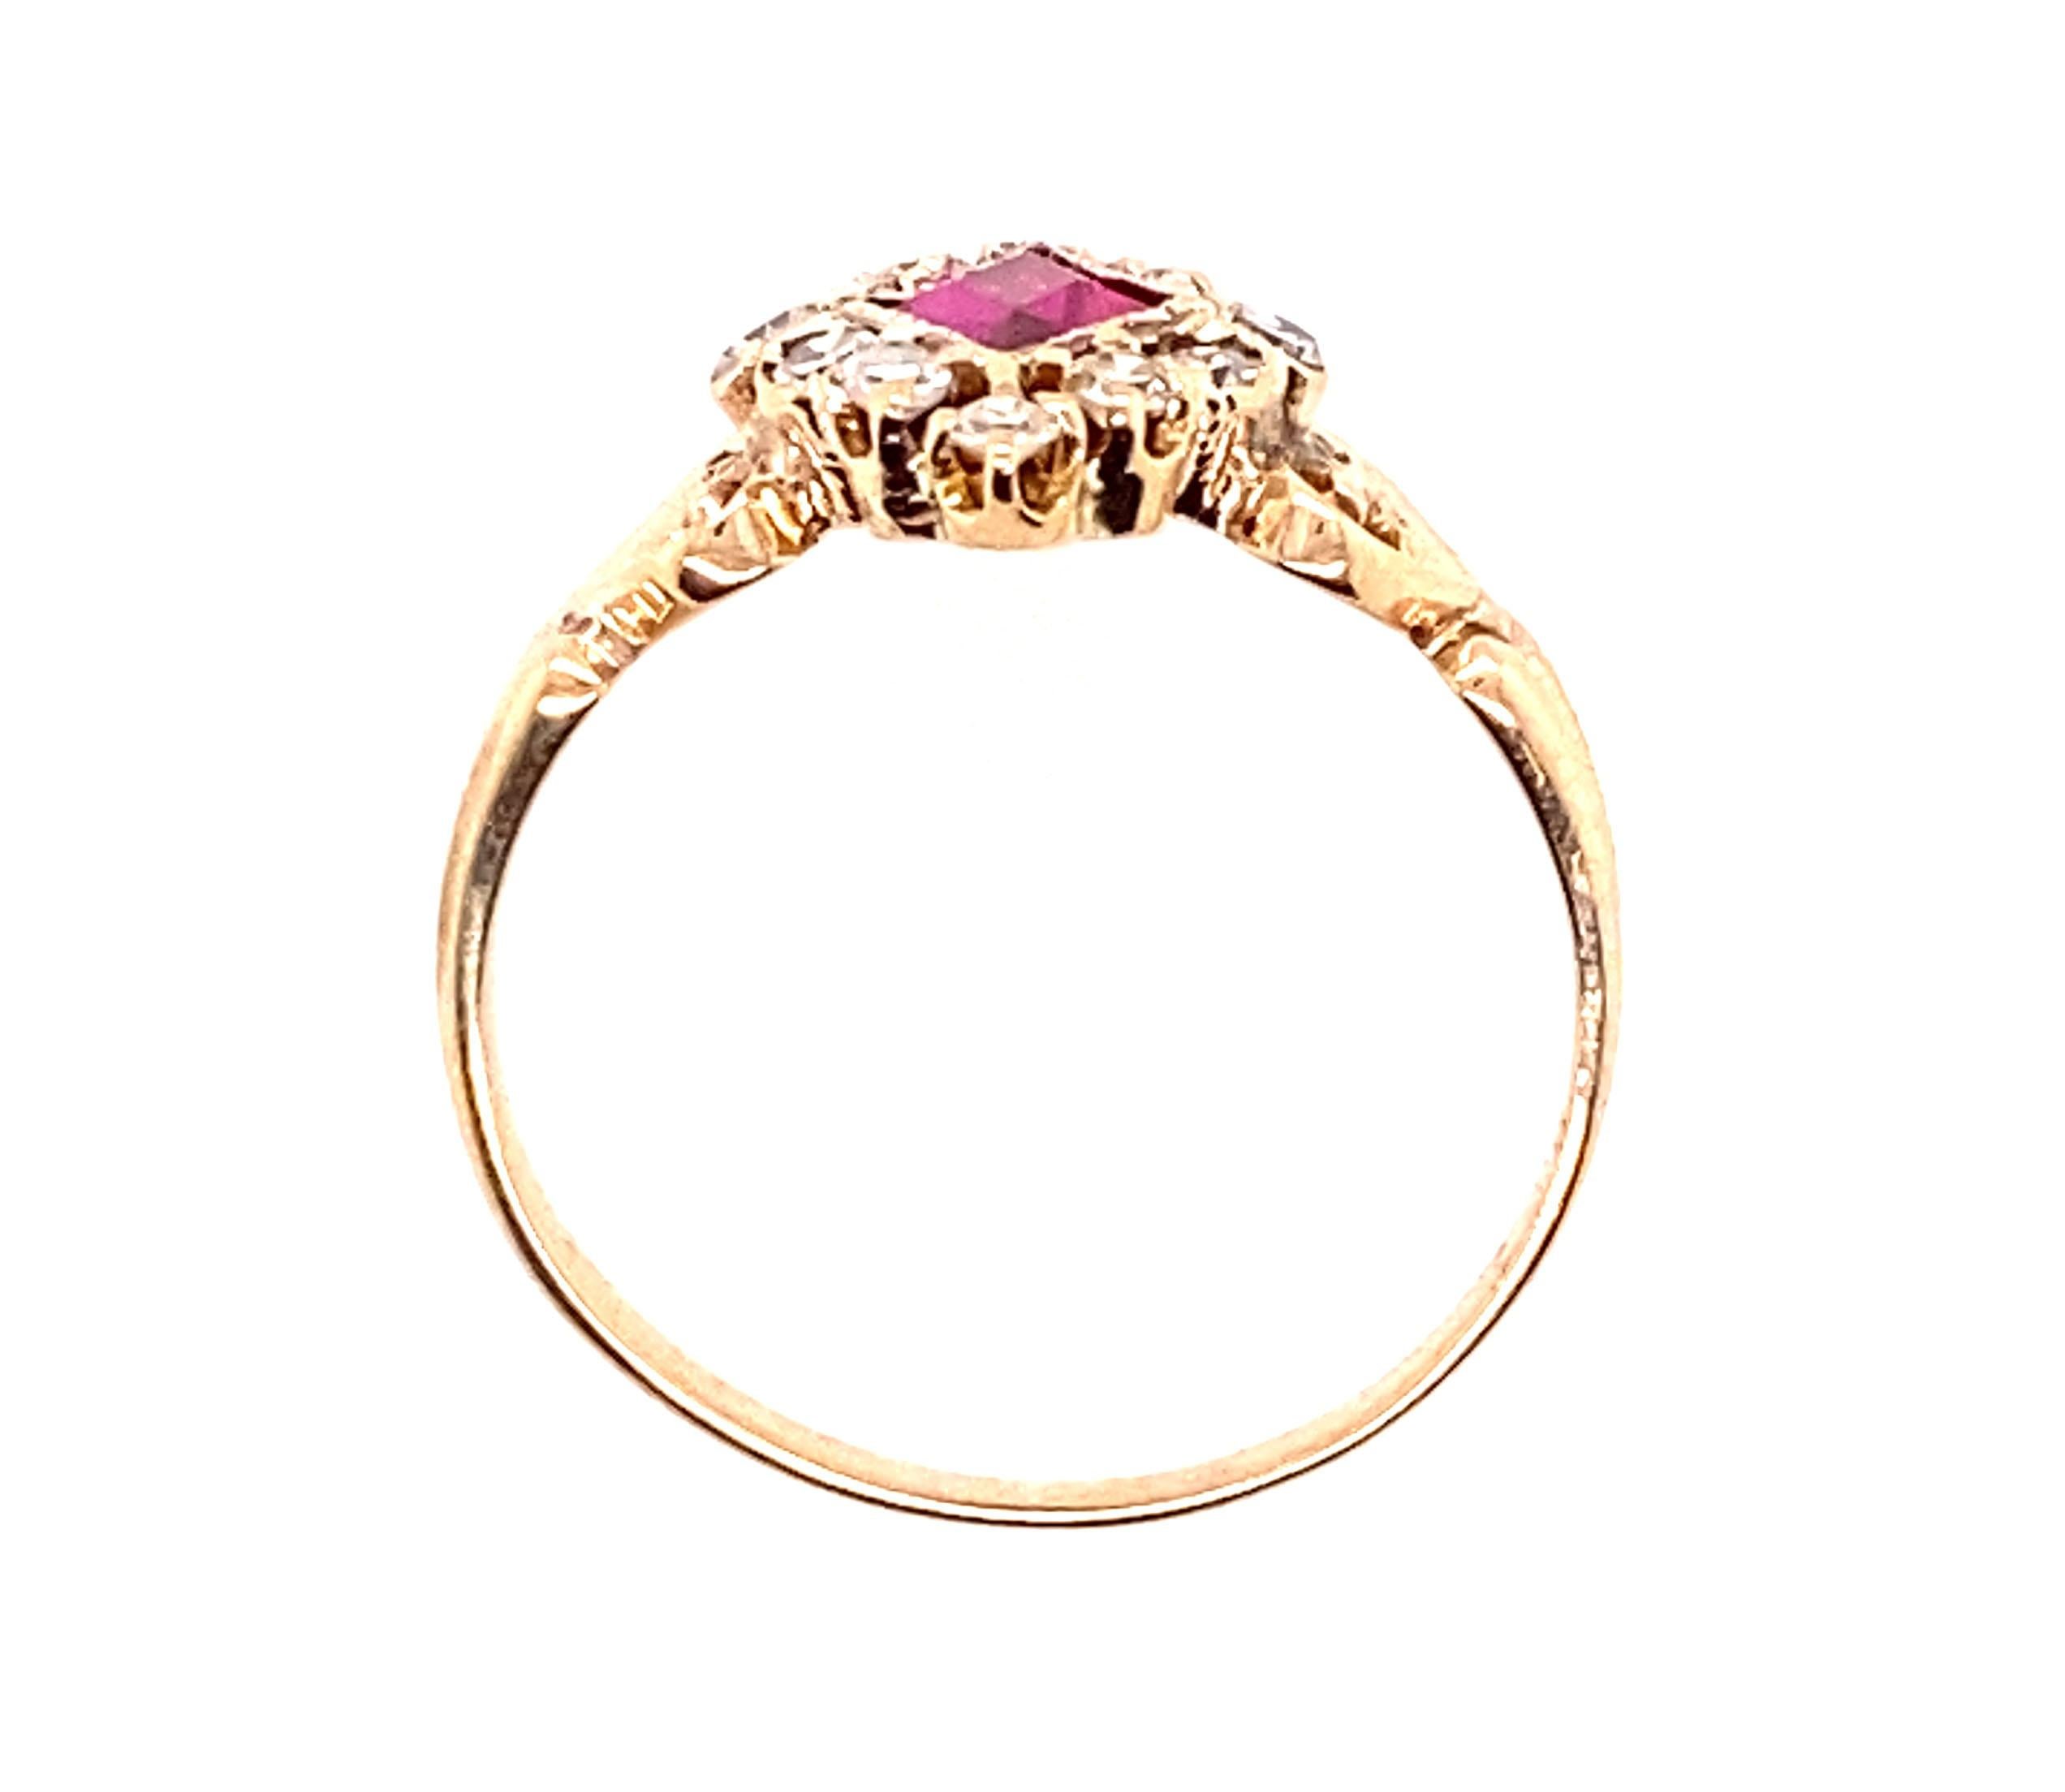 Genuine Original Victorian Antique from 1860's-1880's Ruby Diamond Ring 1.66ct Yellow Gold

   
Featuring a Lab Grown 8x6mm Unique Cut Ruby Center

Circa 1860's-1880's

Genuine Antique; Not a Reproduction 

Genuine Single Cut Mined Diamonds Accent